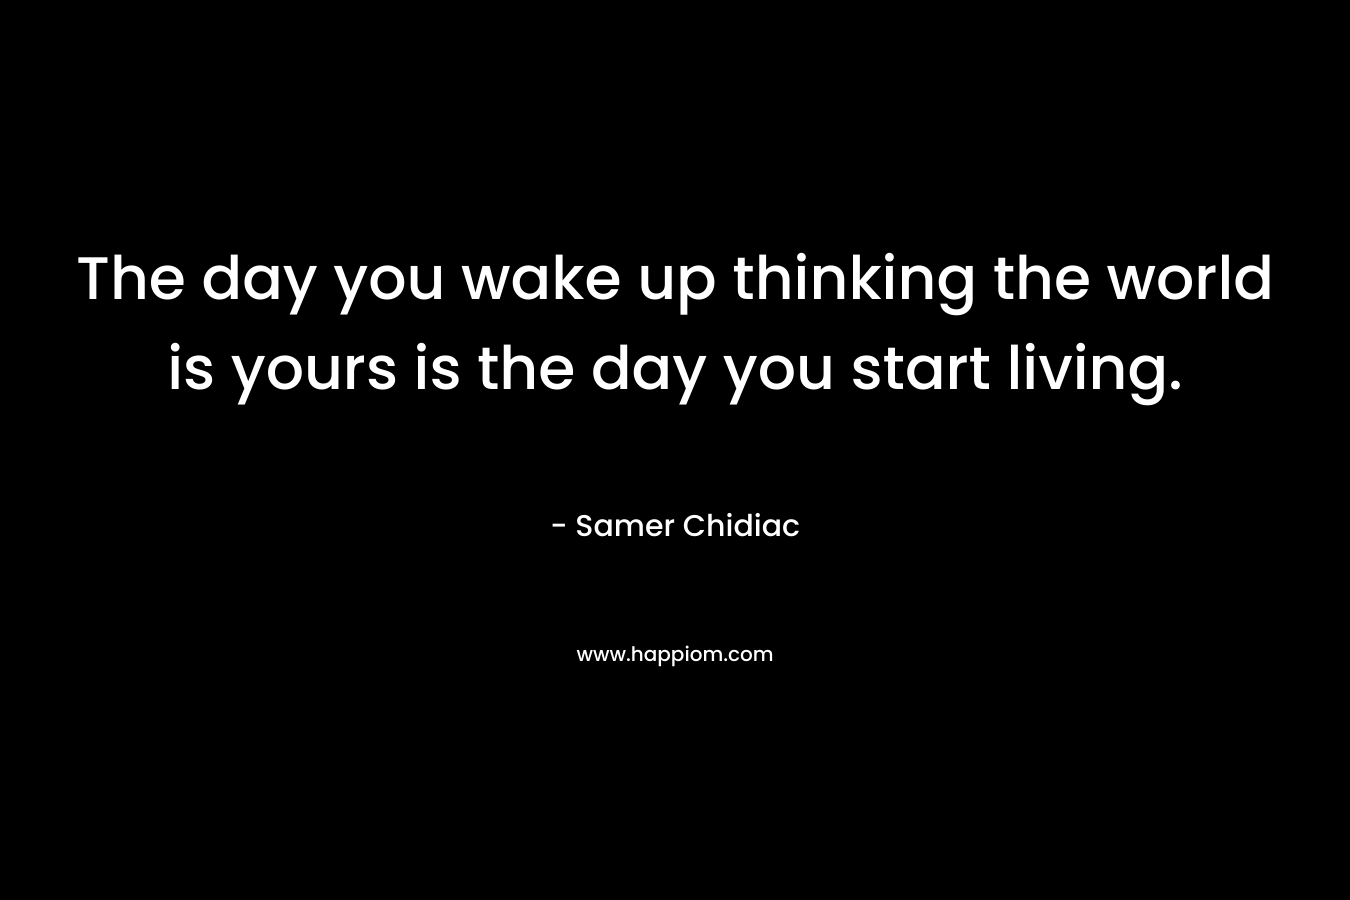 The day you wake up thinking the world is yours is the day you start living. – Samer Chidiac